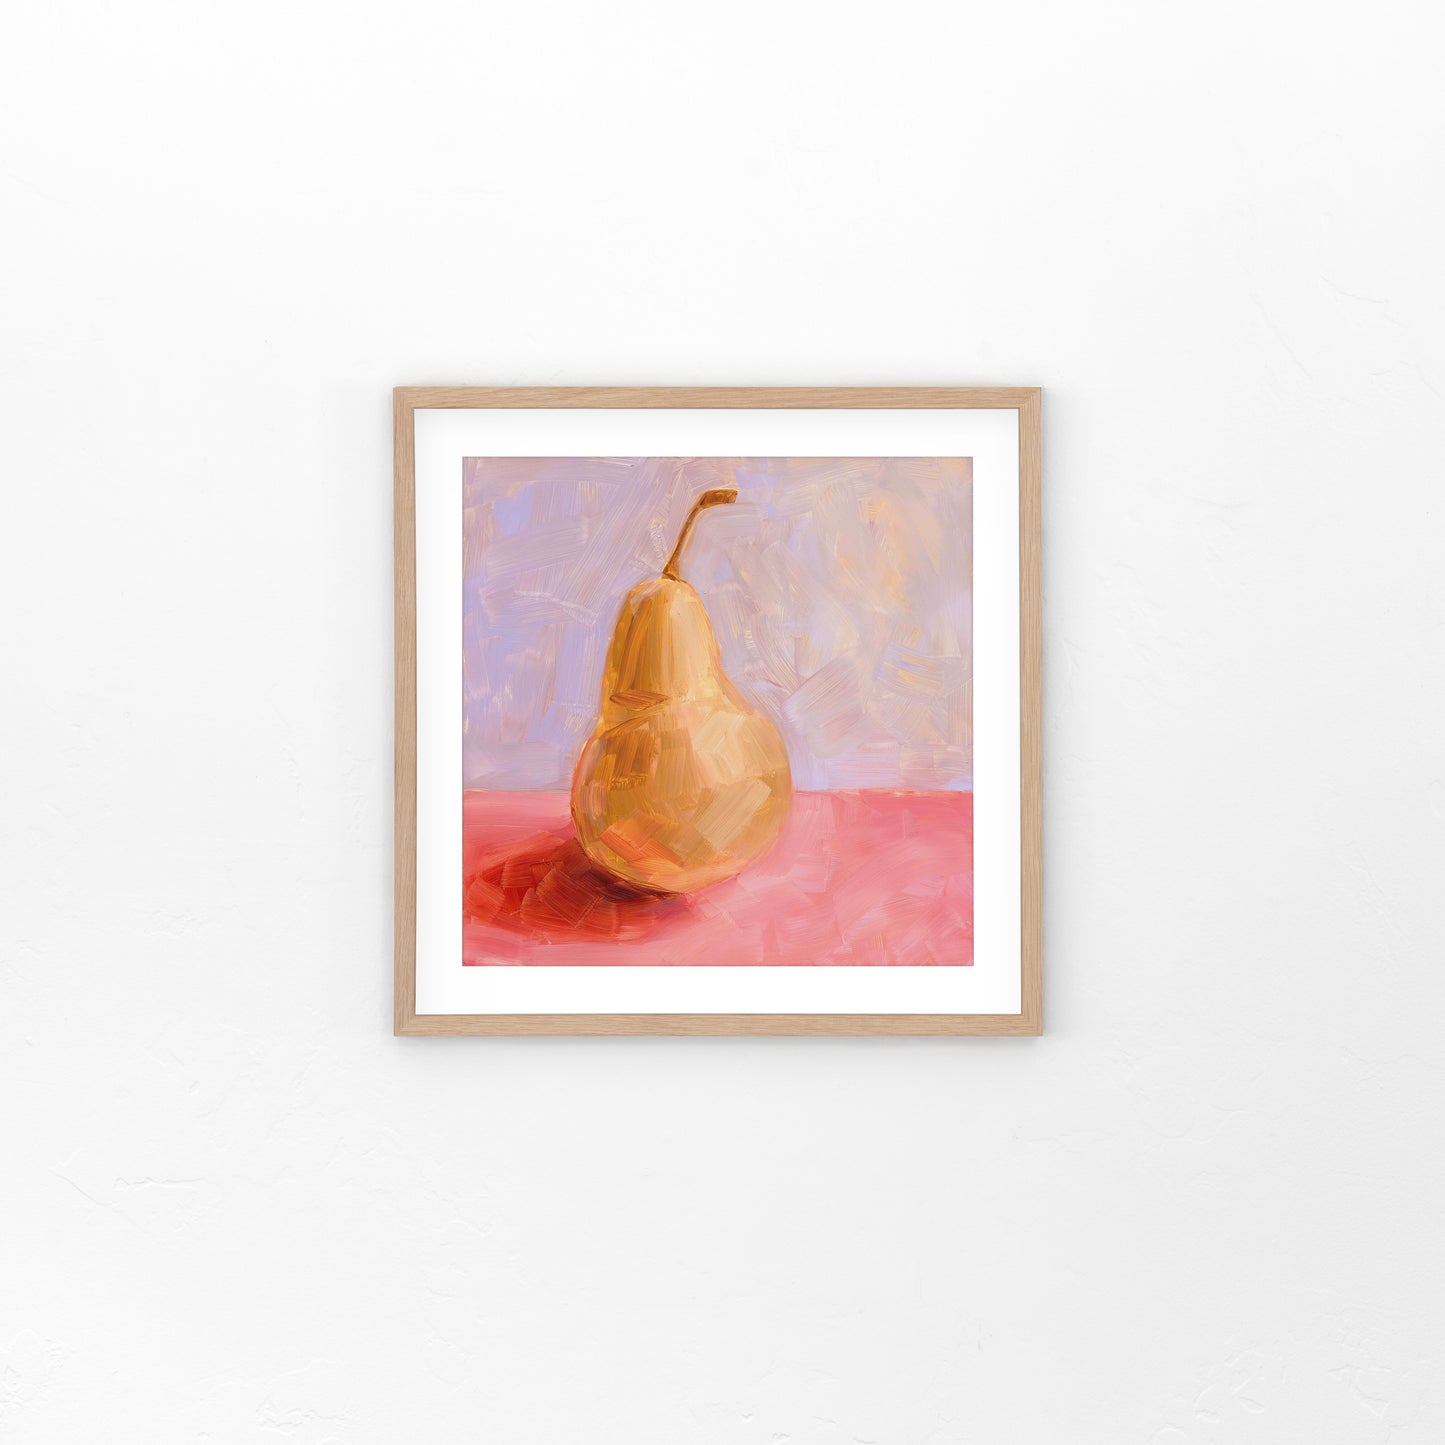 lifestyle photo of a fine art framed paper print of a yellow pear with strong red-pink shadows on a textured pink surface and a textured lilac background